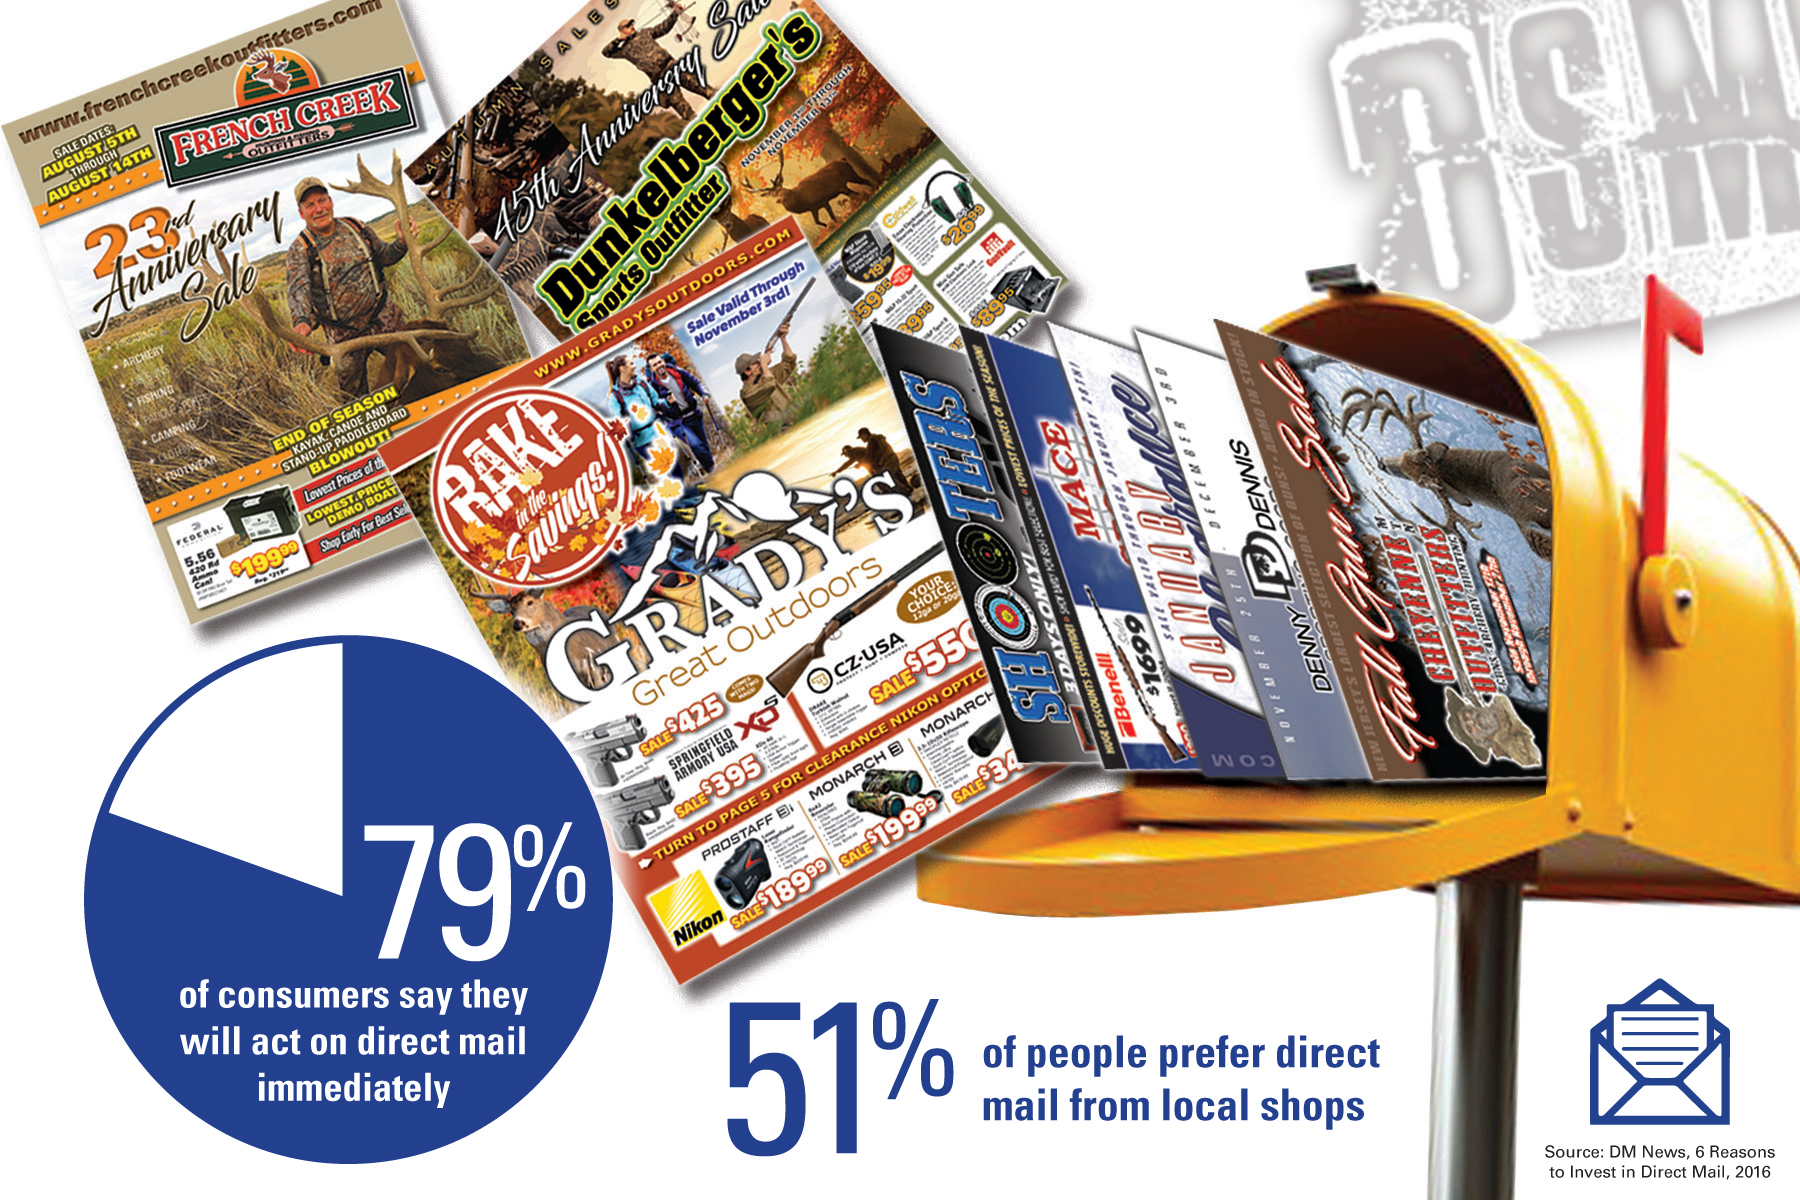 Direct Mail Advertising: 79% of consumers say they will act of direct mail immediately. 51% of people prefer direct mail from local shops.